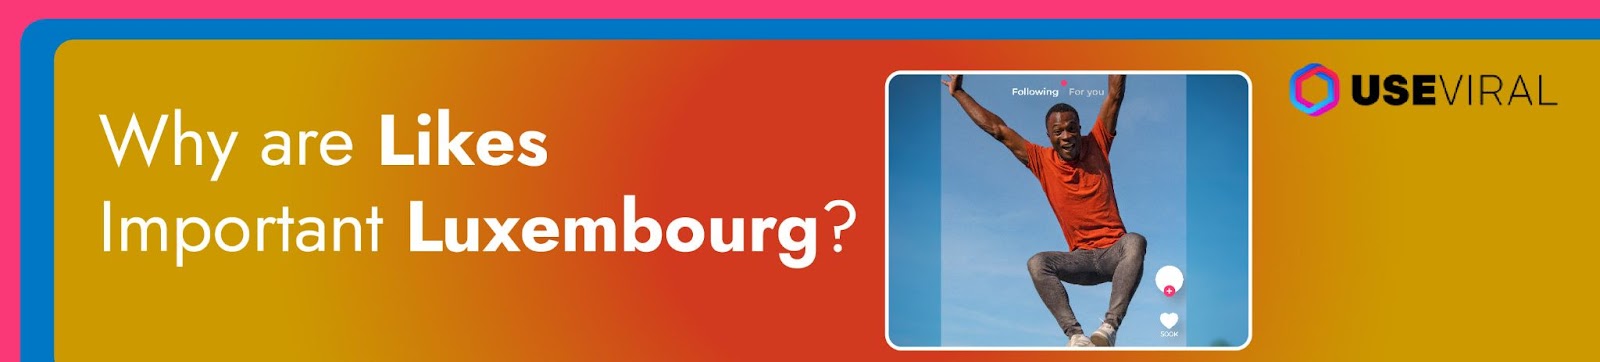 Why are Likes Important Luxembourg?